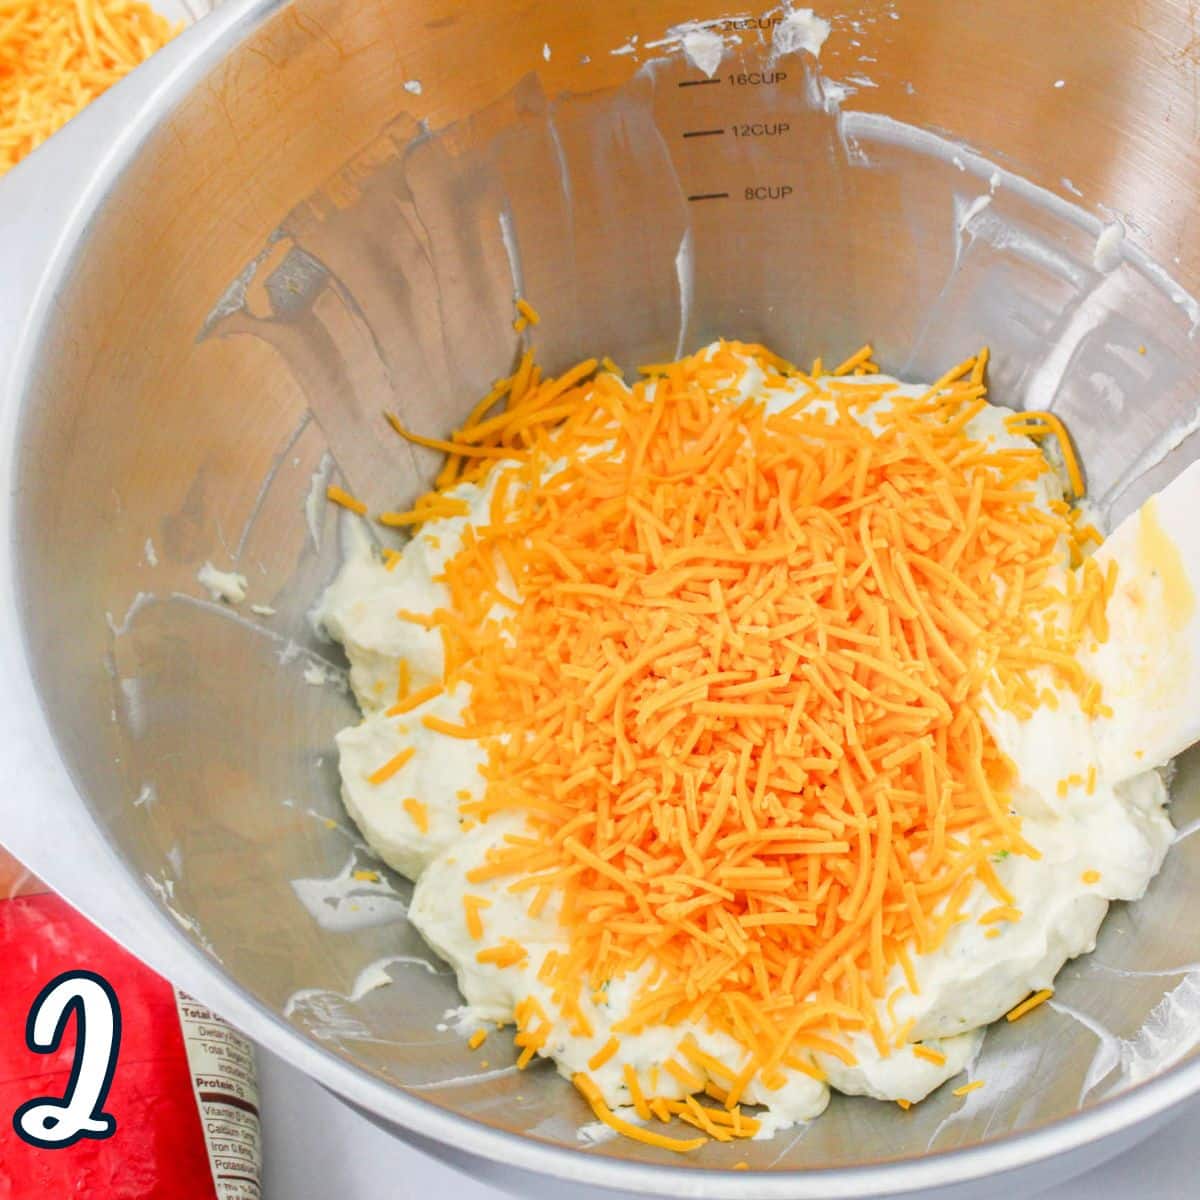 Shredded cheese added to a condensed soup and sour cream mixture in a mixing bowl. 